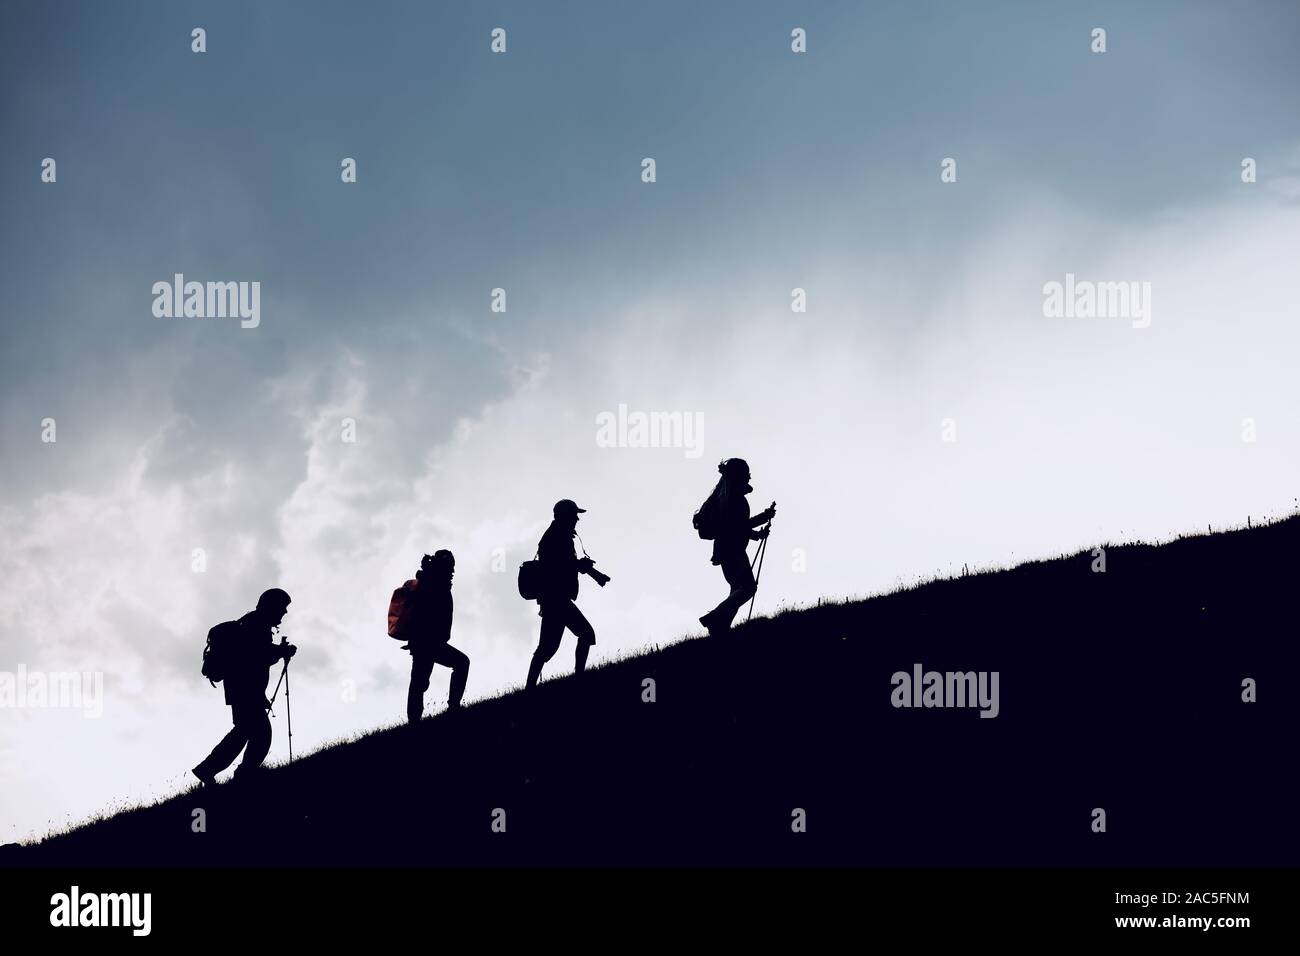 Group of four hikers silhouettes are going uphill in mountains against cloudy sky Stock Photo